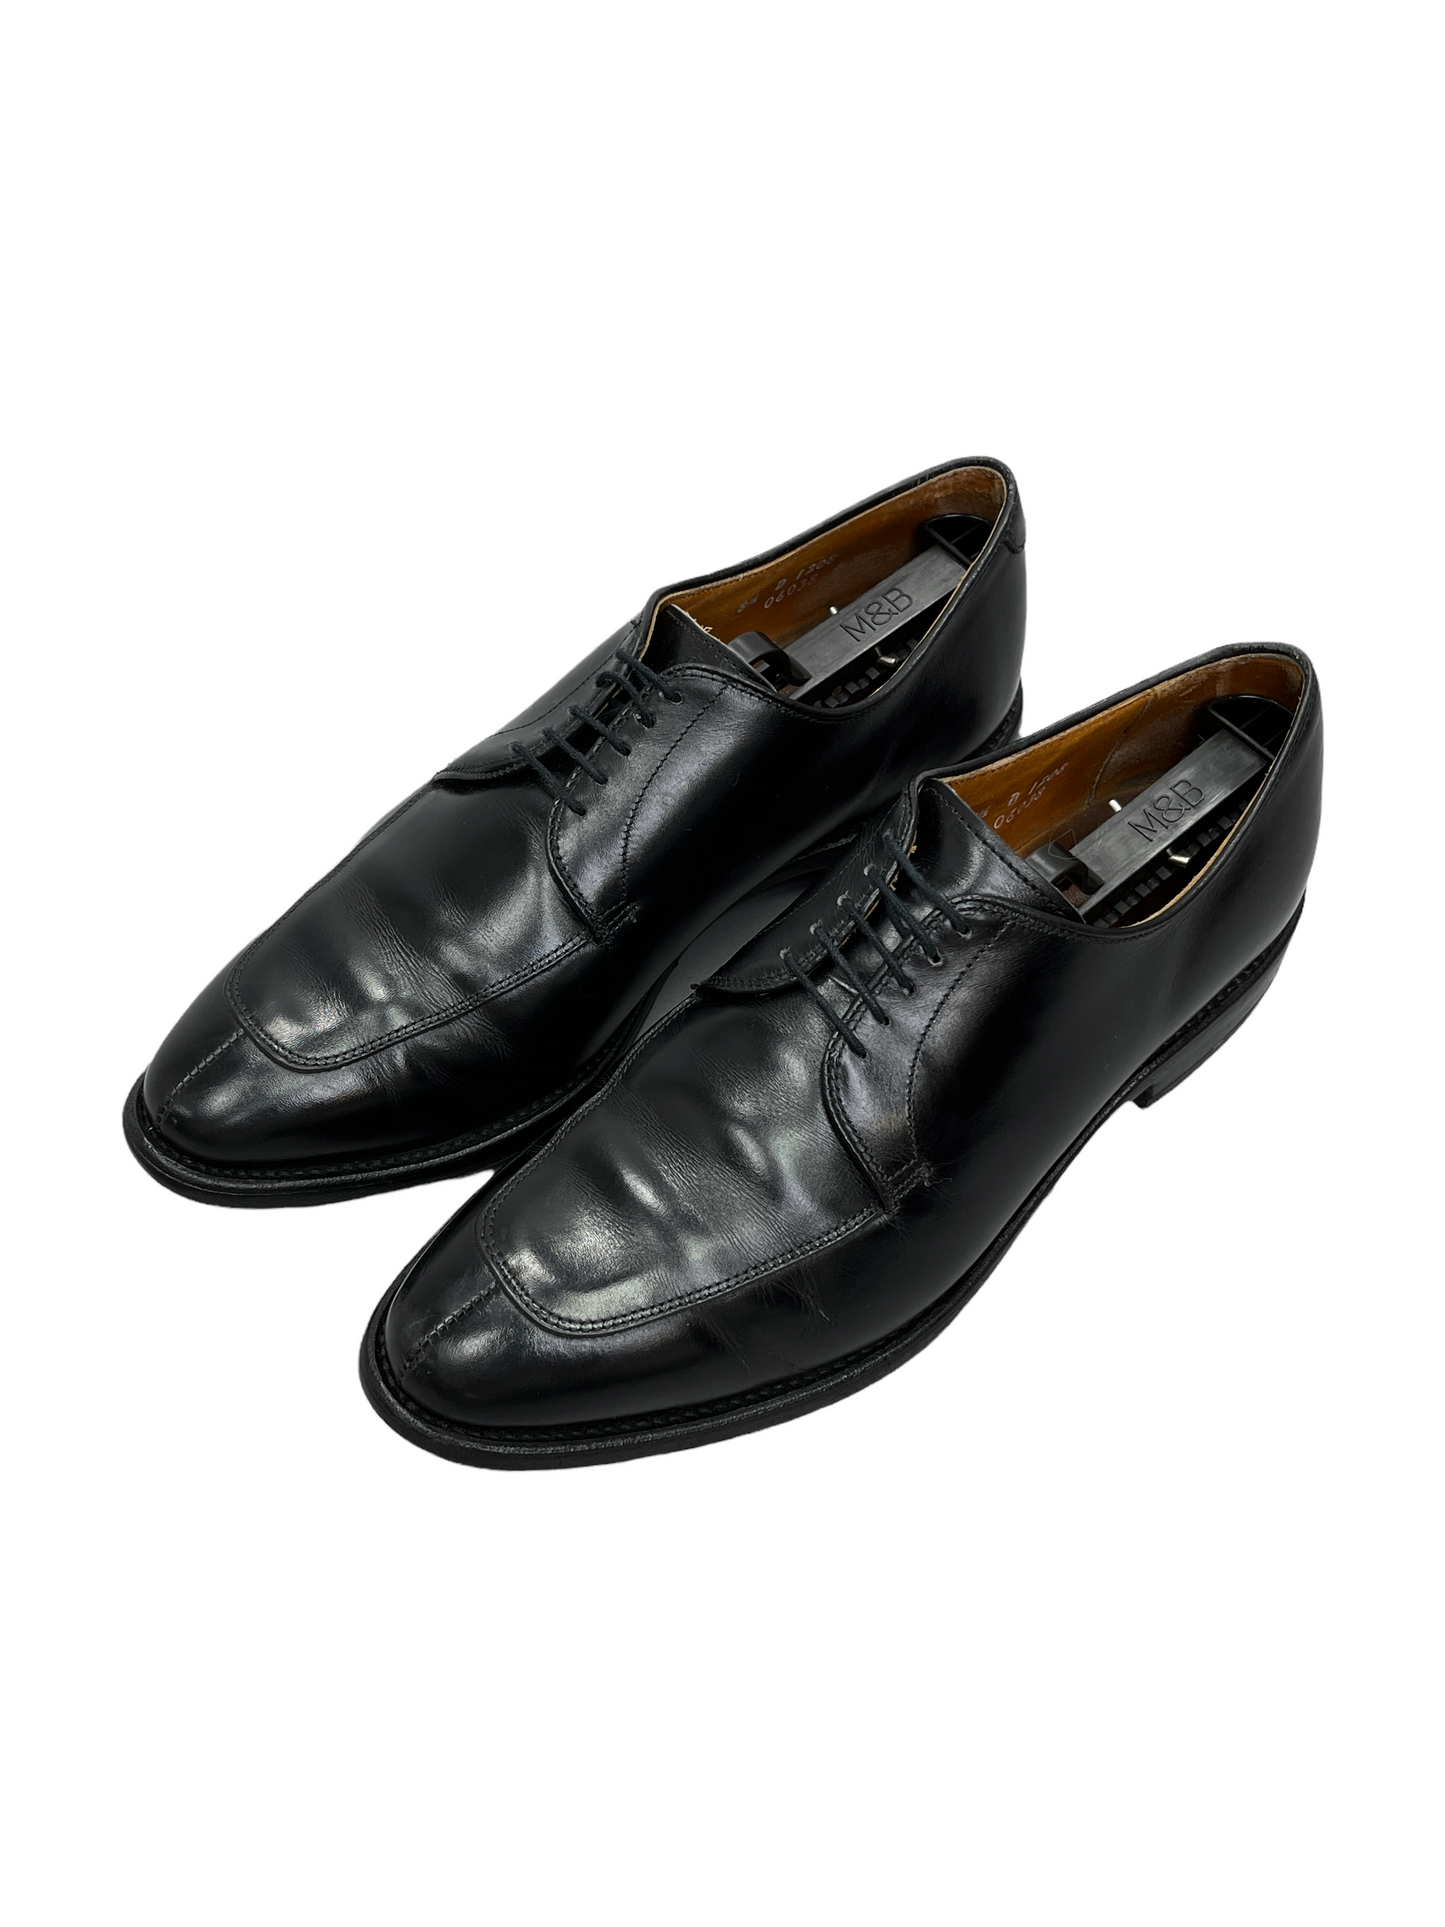 Allen Edmonds Delray Black Leather Derby Dress Shoes 8.5 D US Men — Genuine Design luxury consignment Calgary, Canada New and pre-owned clothing, shoes, accessories.